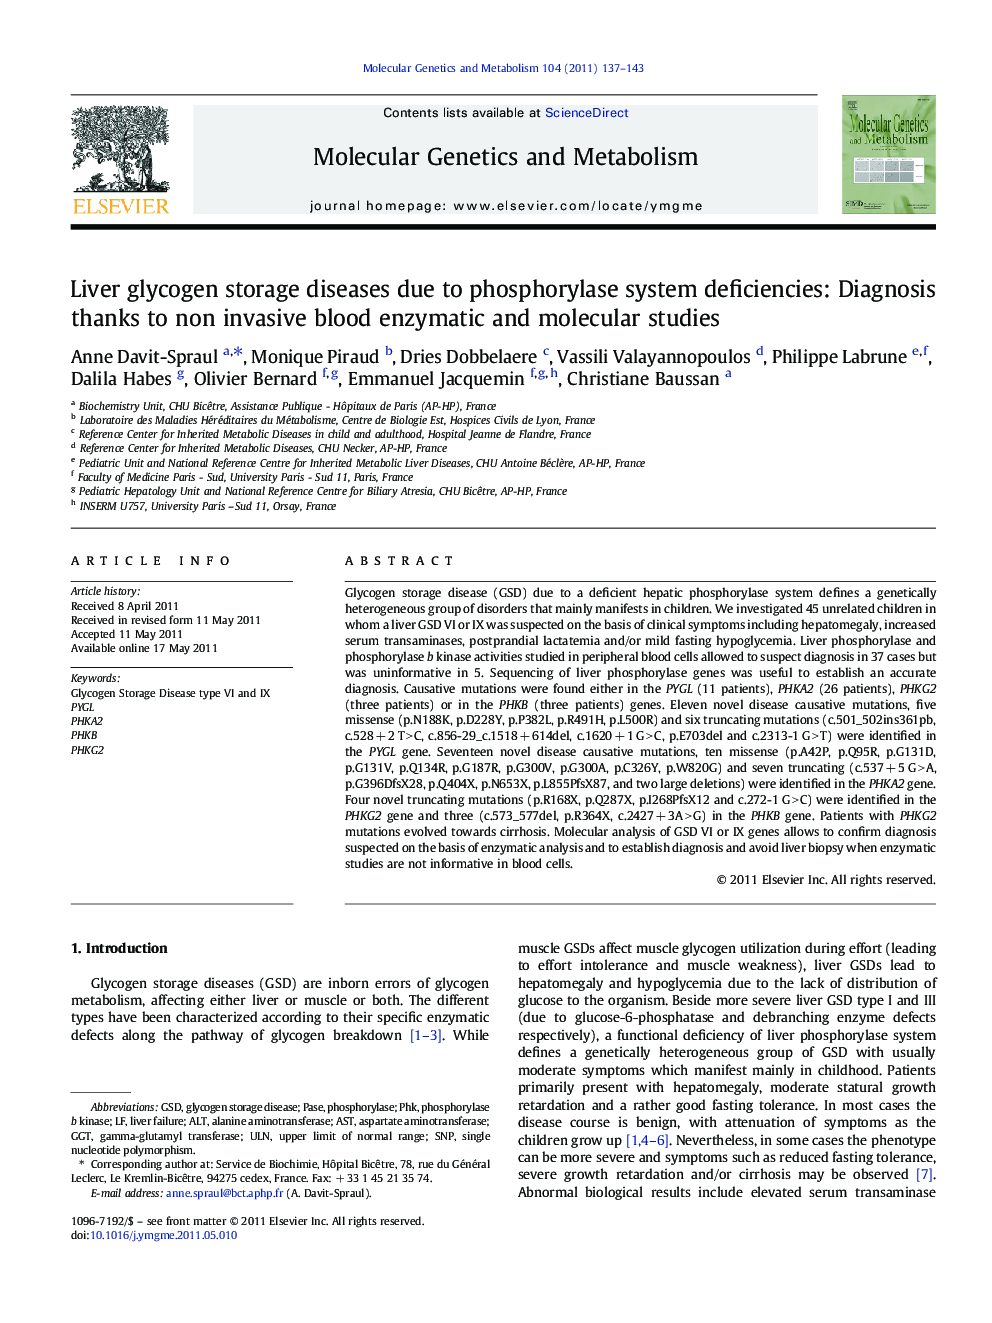 Liver glycogen storage diseases due to phosphorylase system deficiencies: Diagnosis thanks to non invasive blood enzymatic and molecular studies